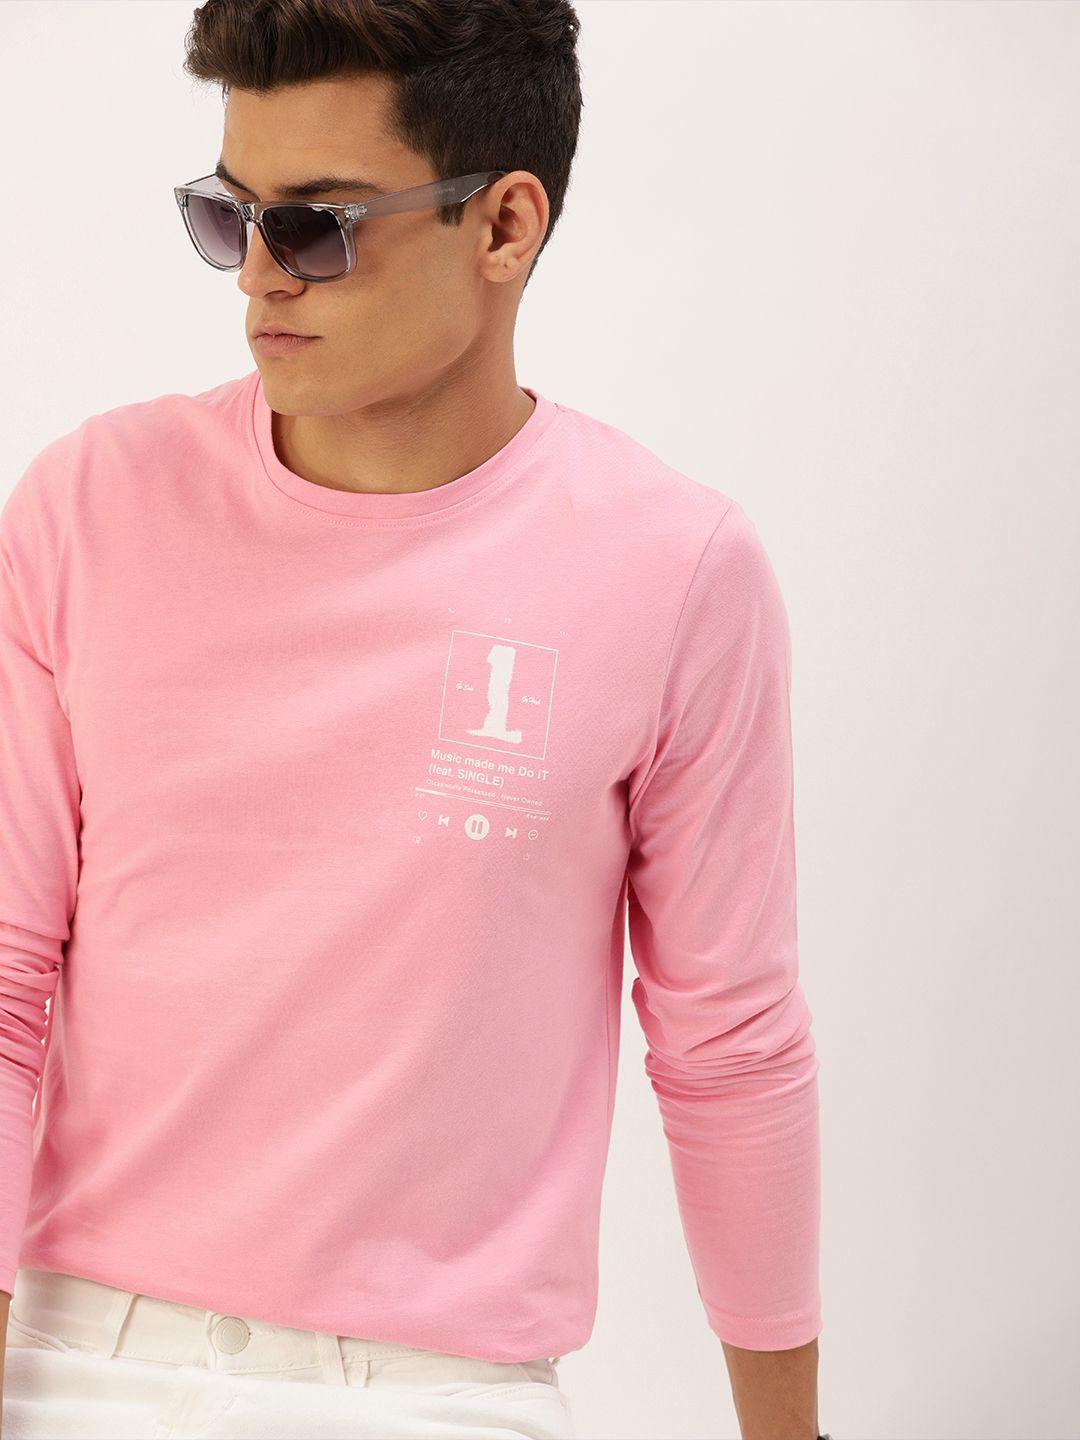 single men pink & white typography printed slim fit pure cotton t-shirt